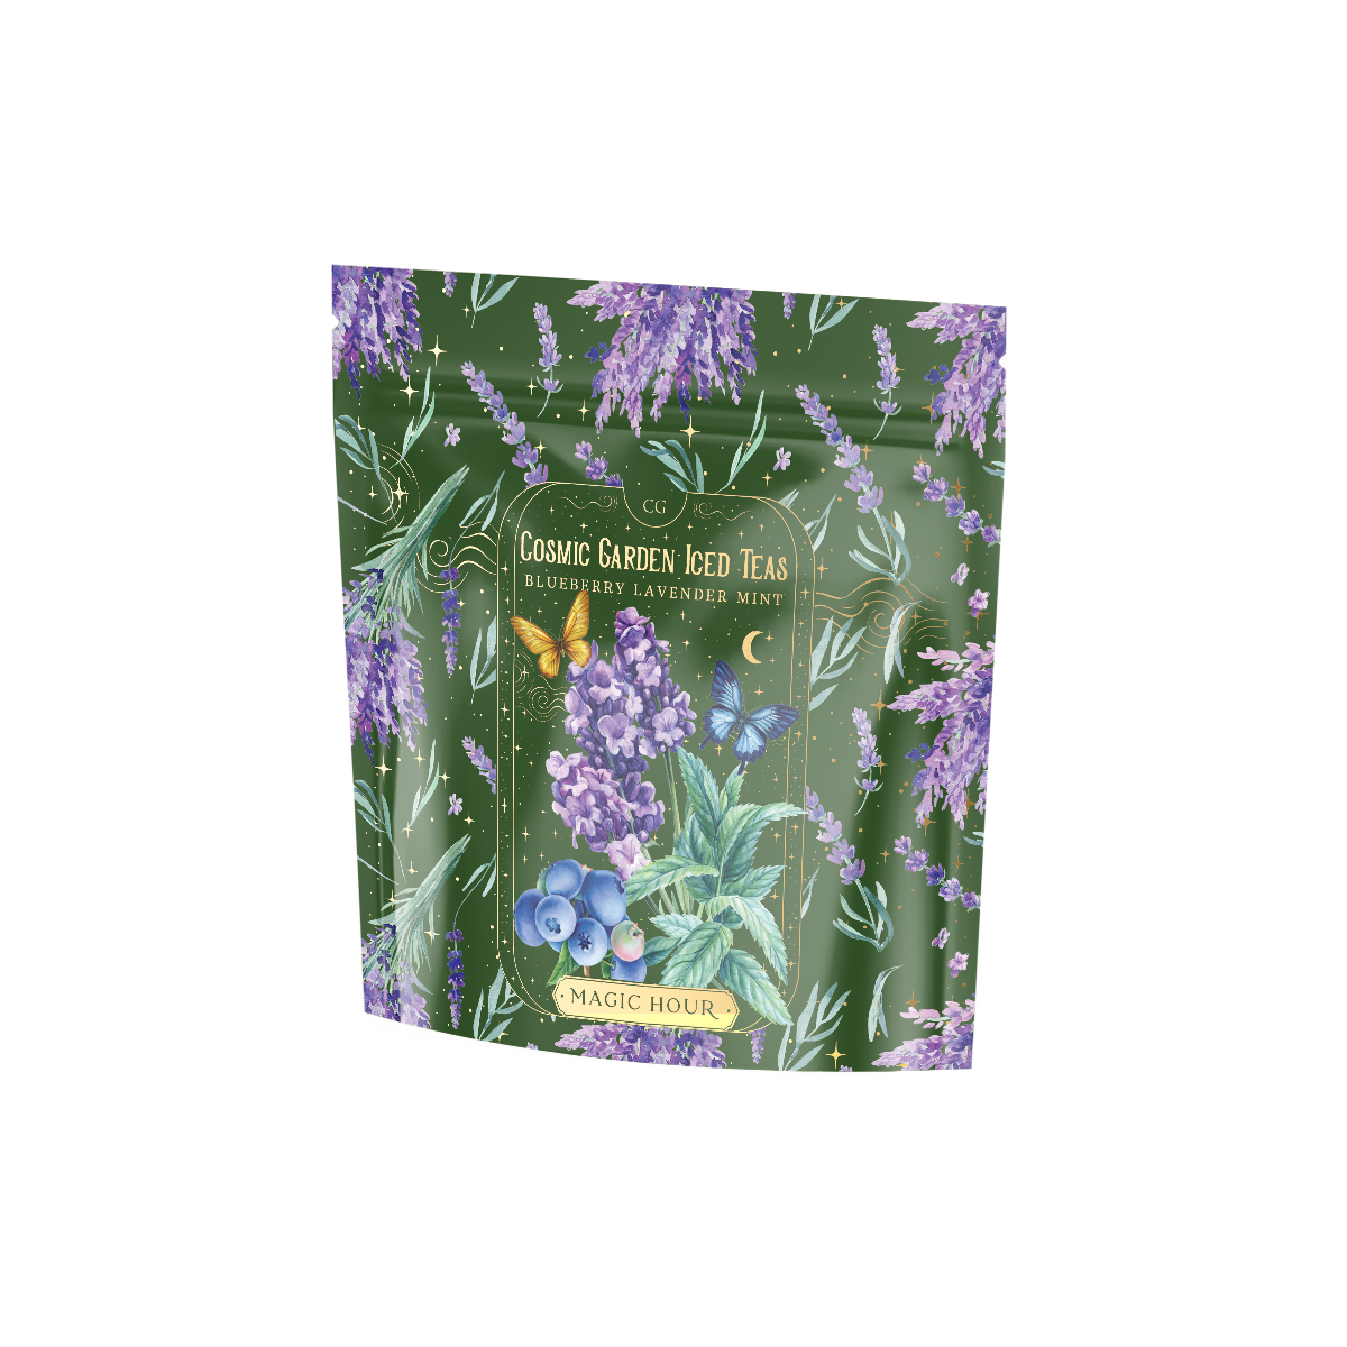 A green metallic tea packaging with colorful illustrations of lavender, mint leaves, a butterfly, and blueberries. It reads &quot;Blueberry Lavender Mint: Cosmic Garden Iced Tea.&quot; The brand &quot;Magic Hour&quot; is prominently displayed at the bottom of the pouch.